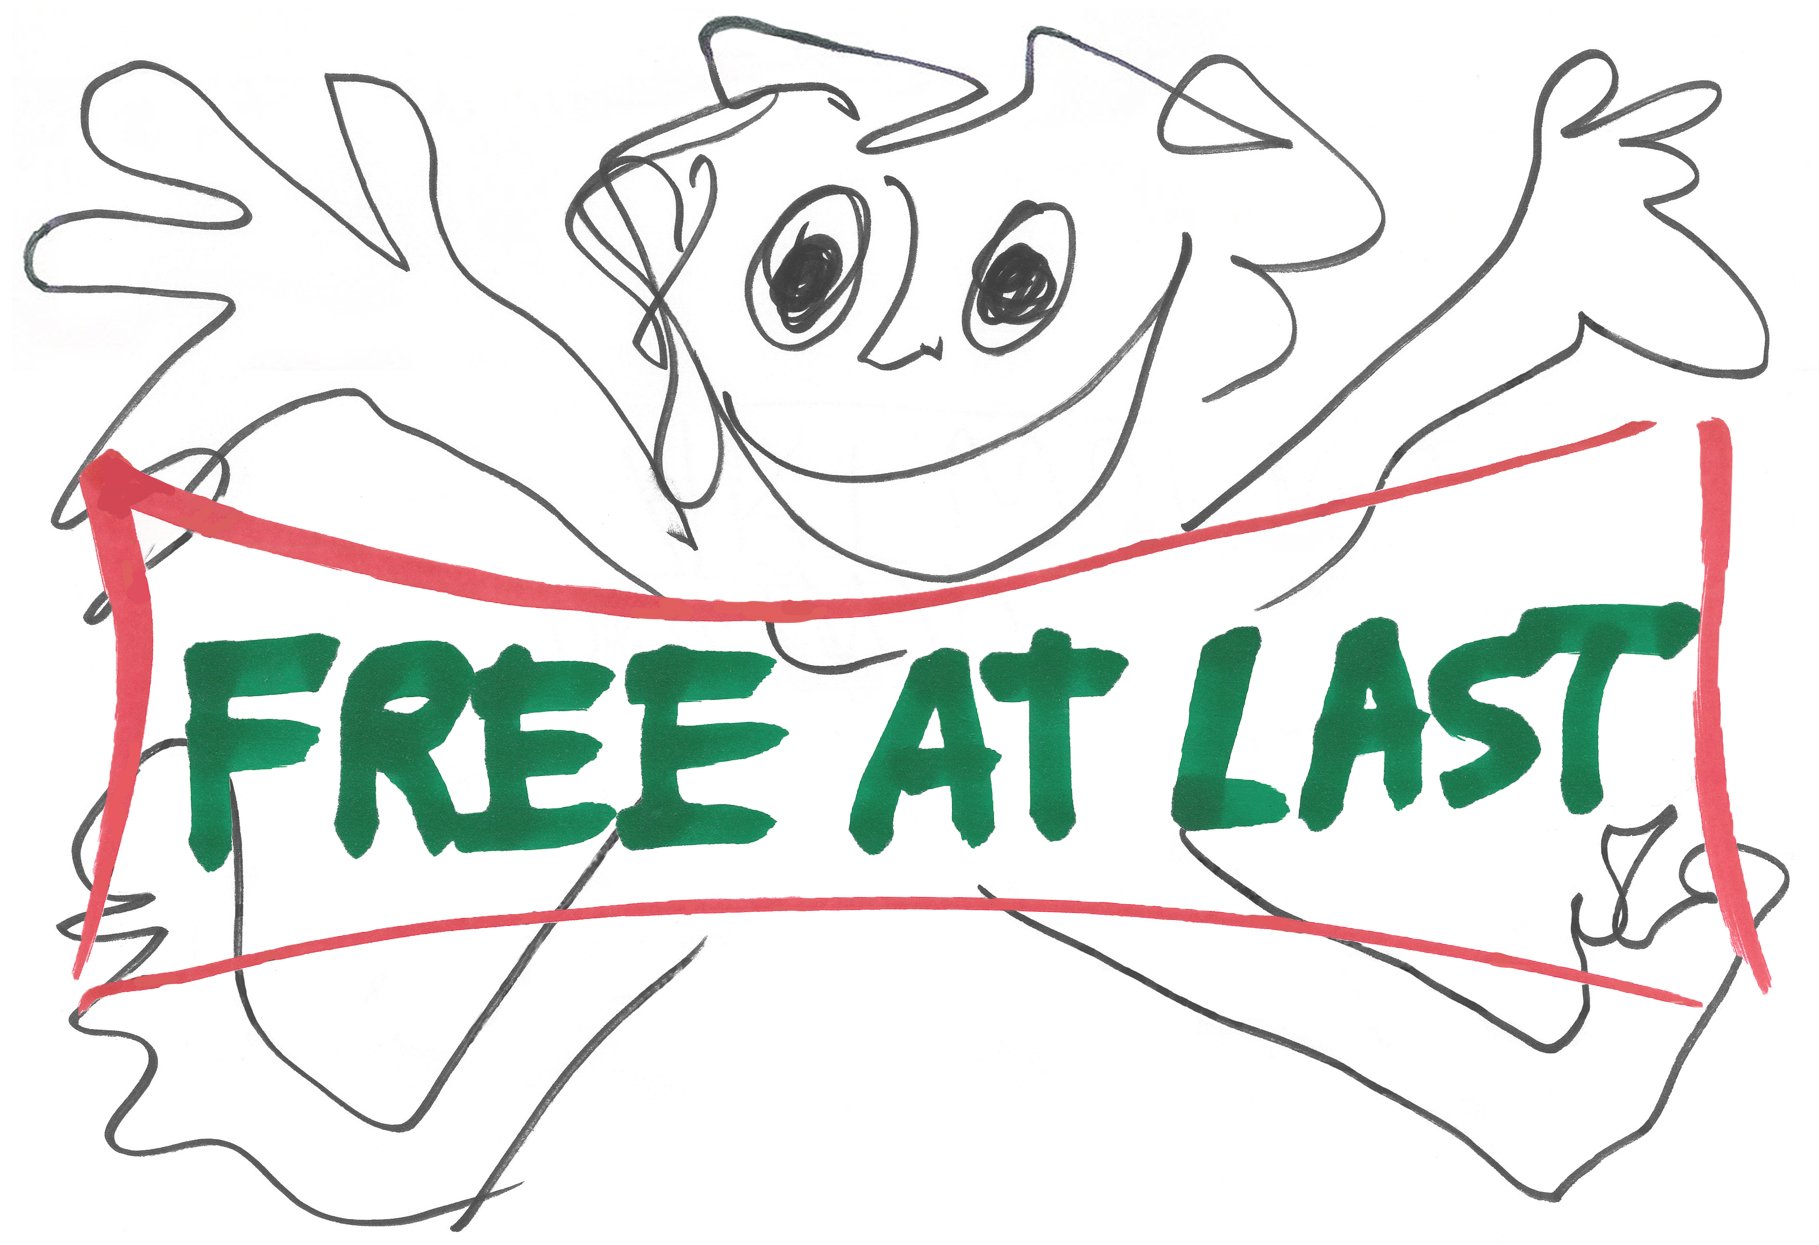 Jeremy Griffith's drawing of a man jumping for joy with text 'Free At Last'